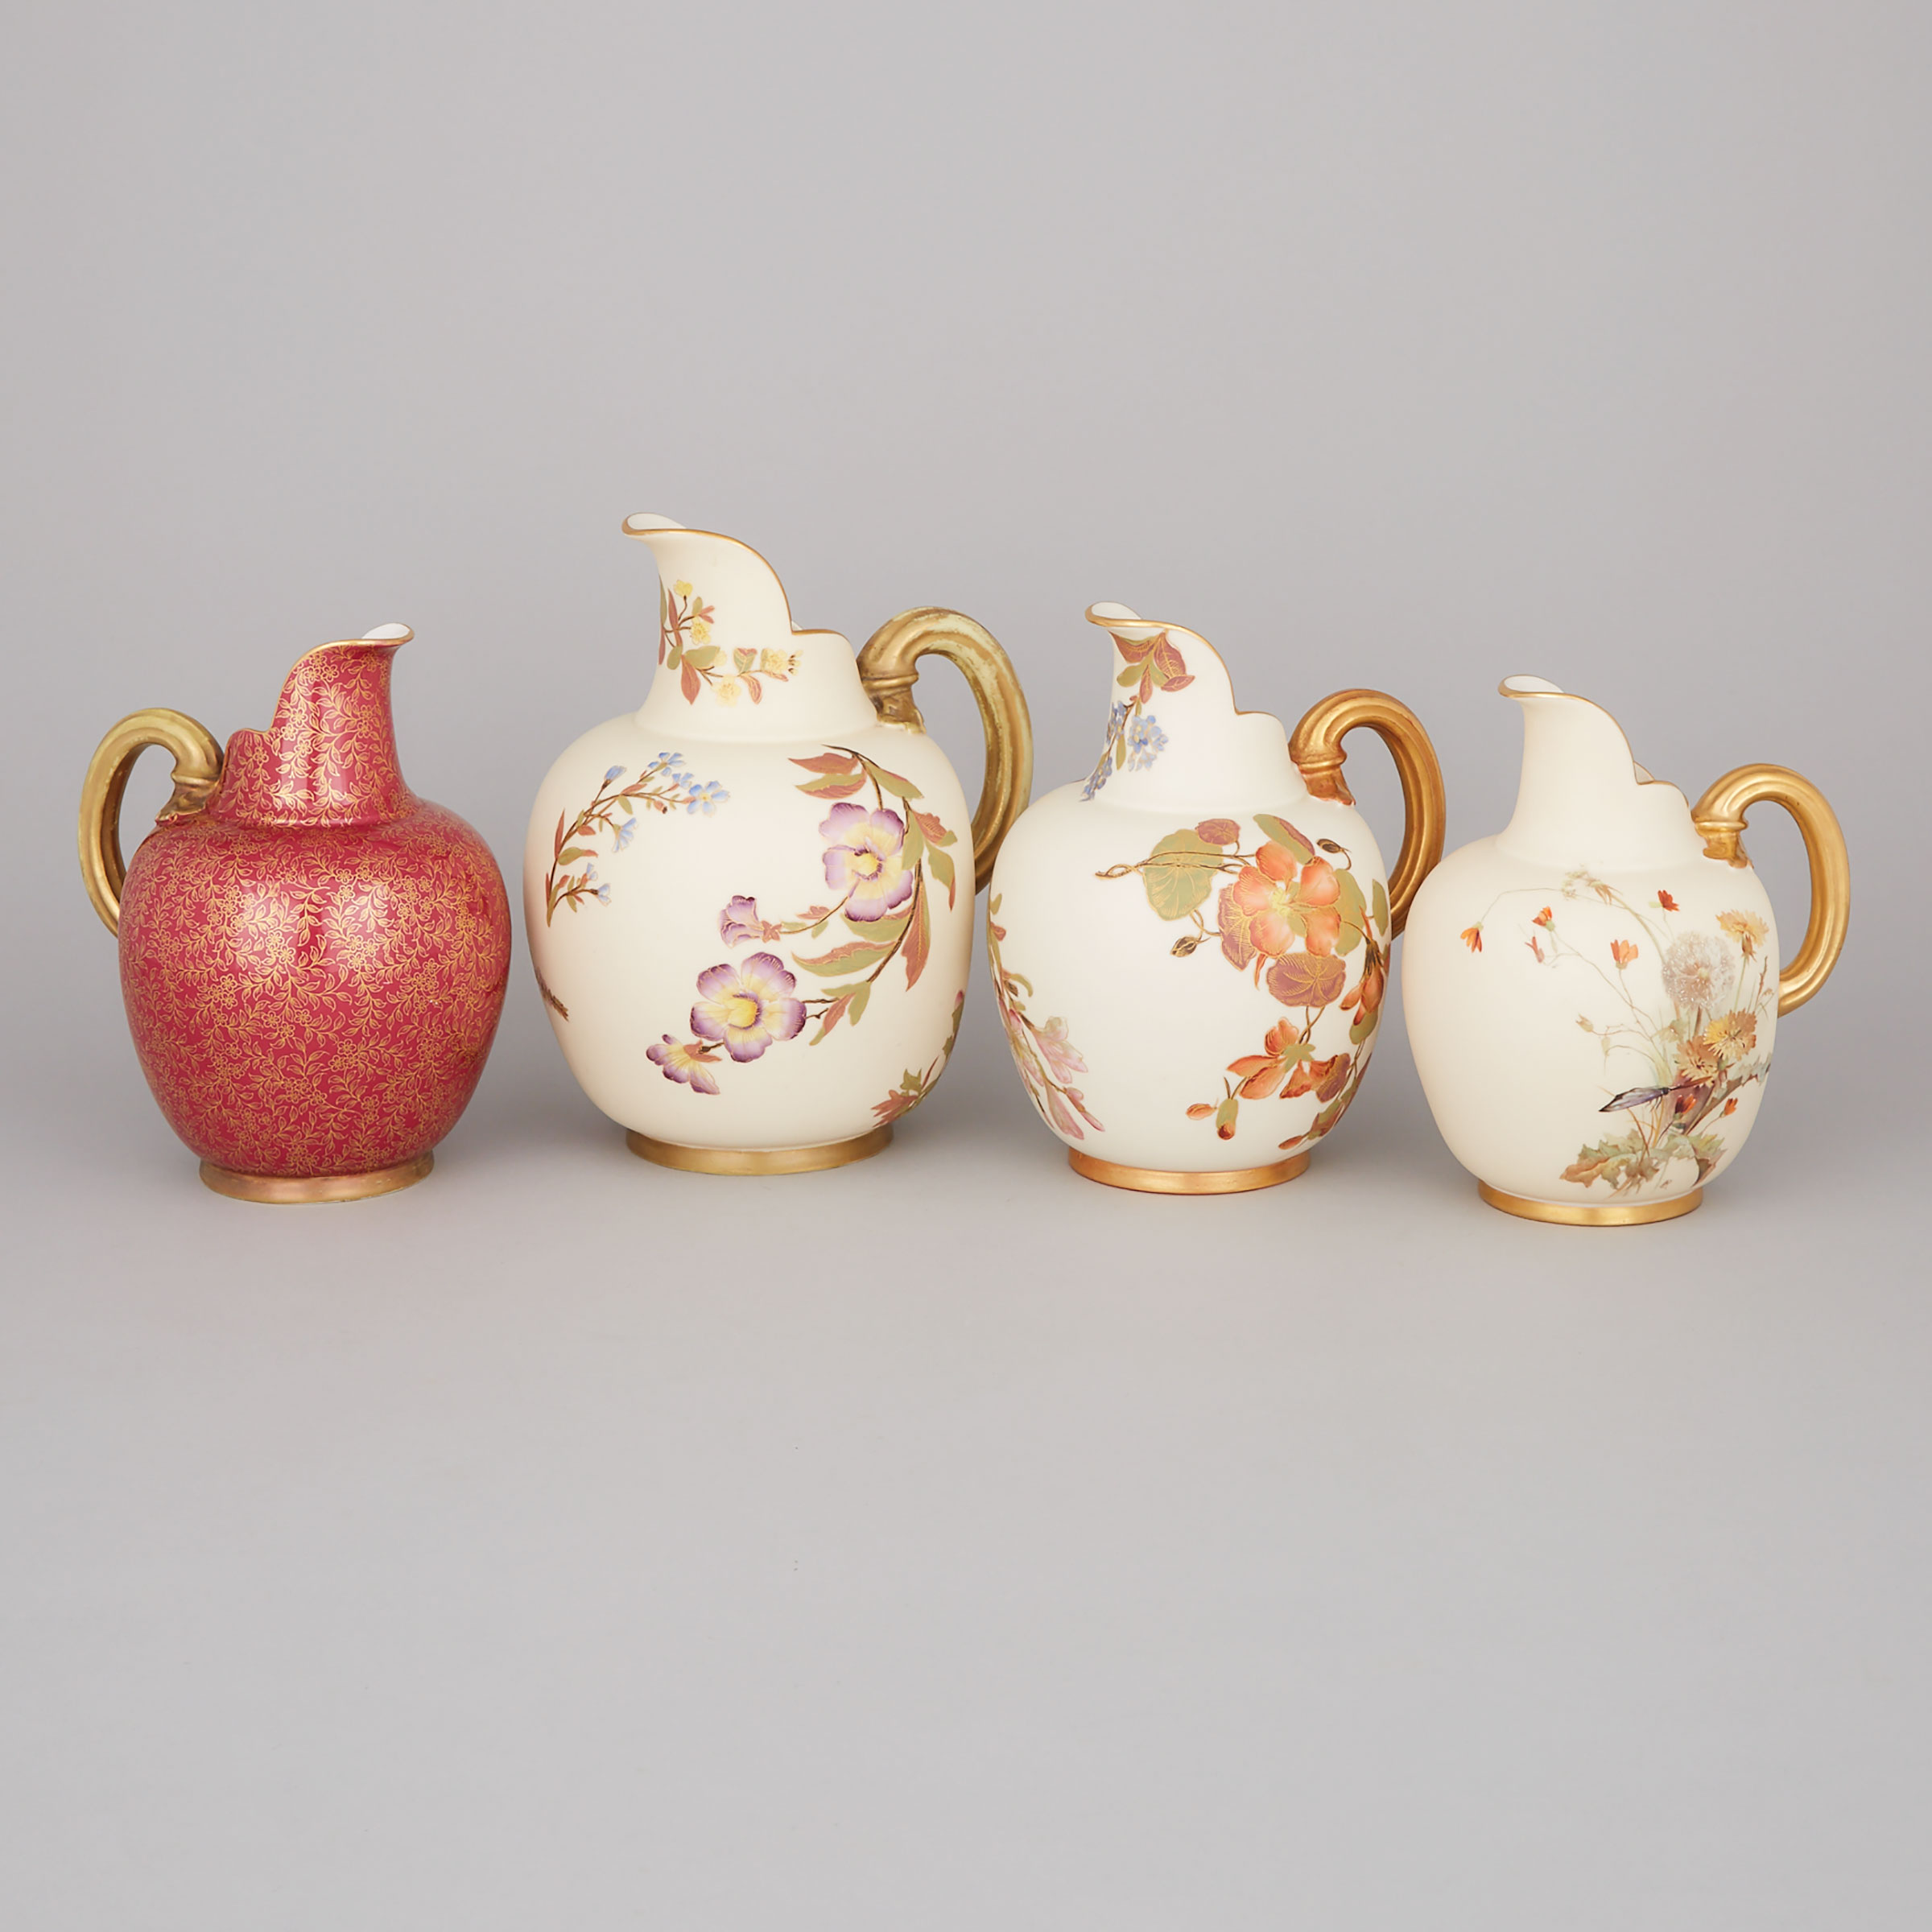 Four Royal Worcester Blush Ivory or Claret Ground Flat Back Jugs, late 19th century